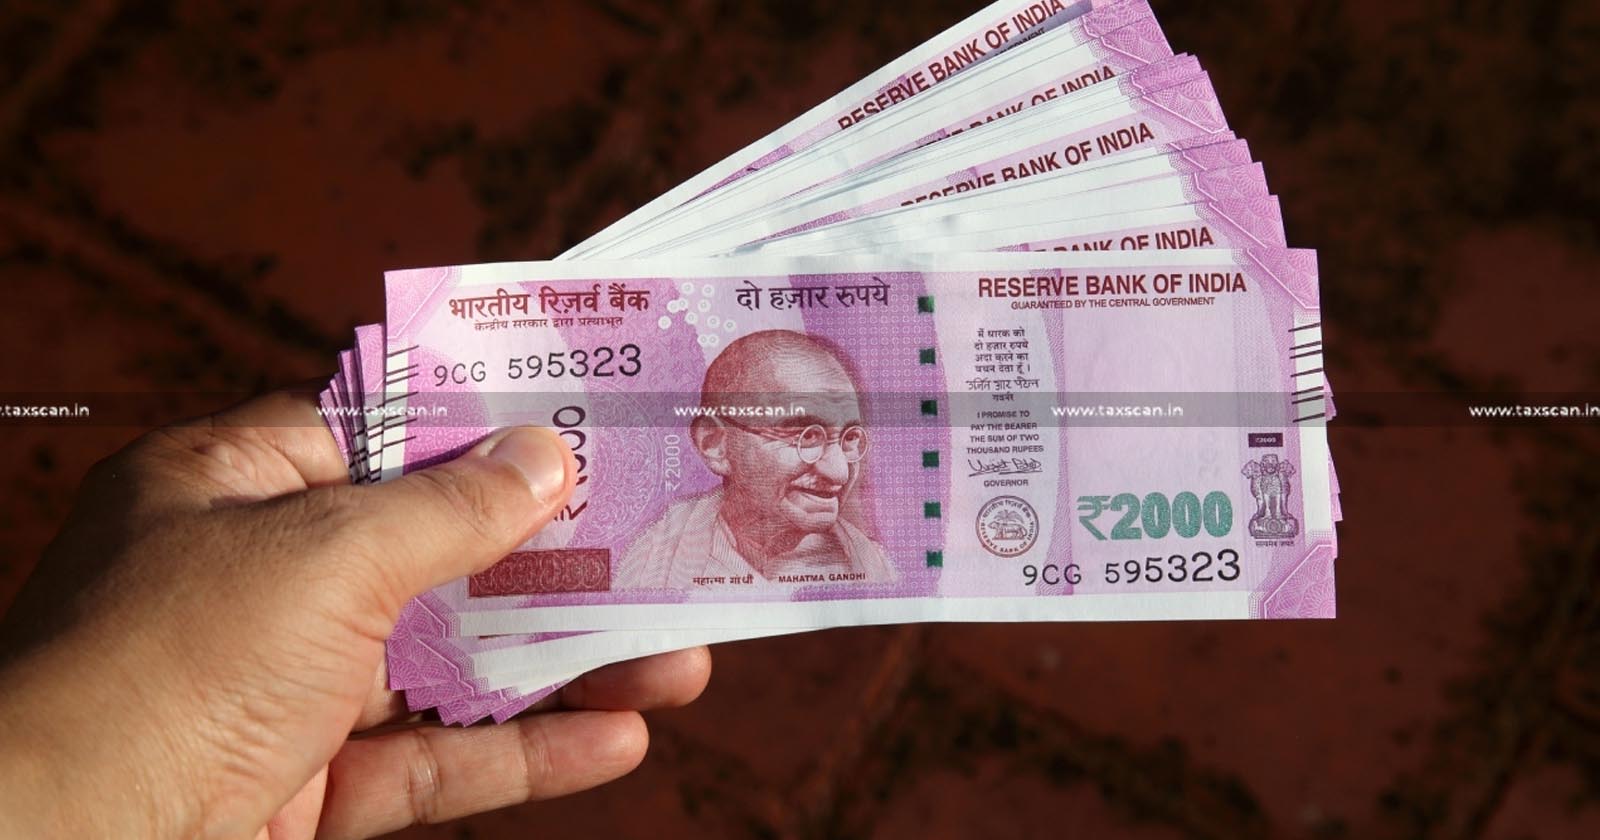 Delhi HC reserves judgement on PIL against Exchange - Deposit of Rs. 2000 Notes without ID Proofs - TAXSCAN